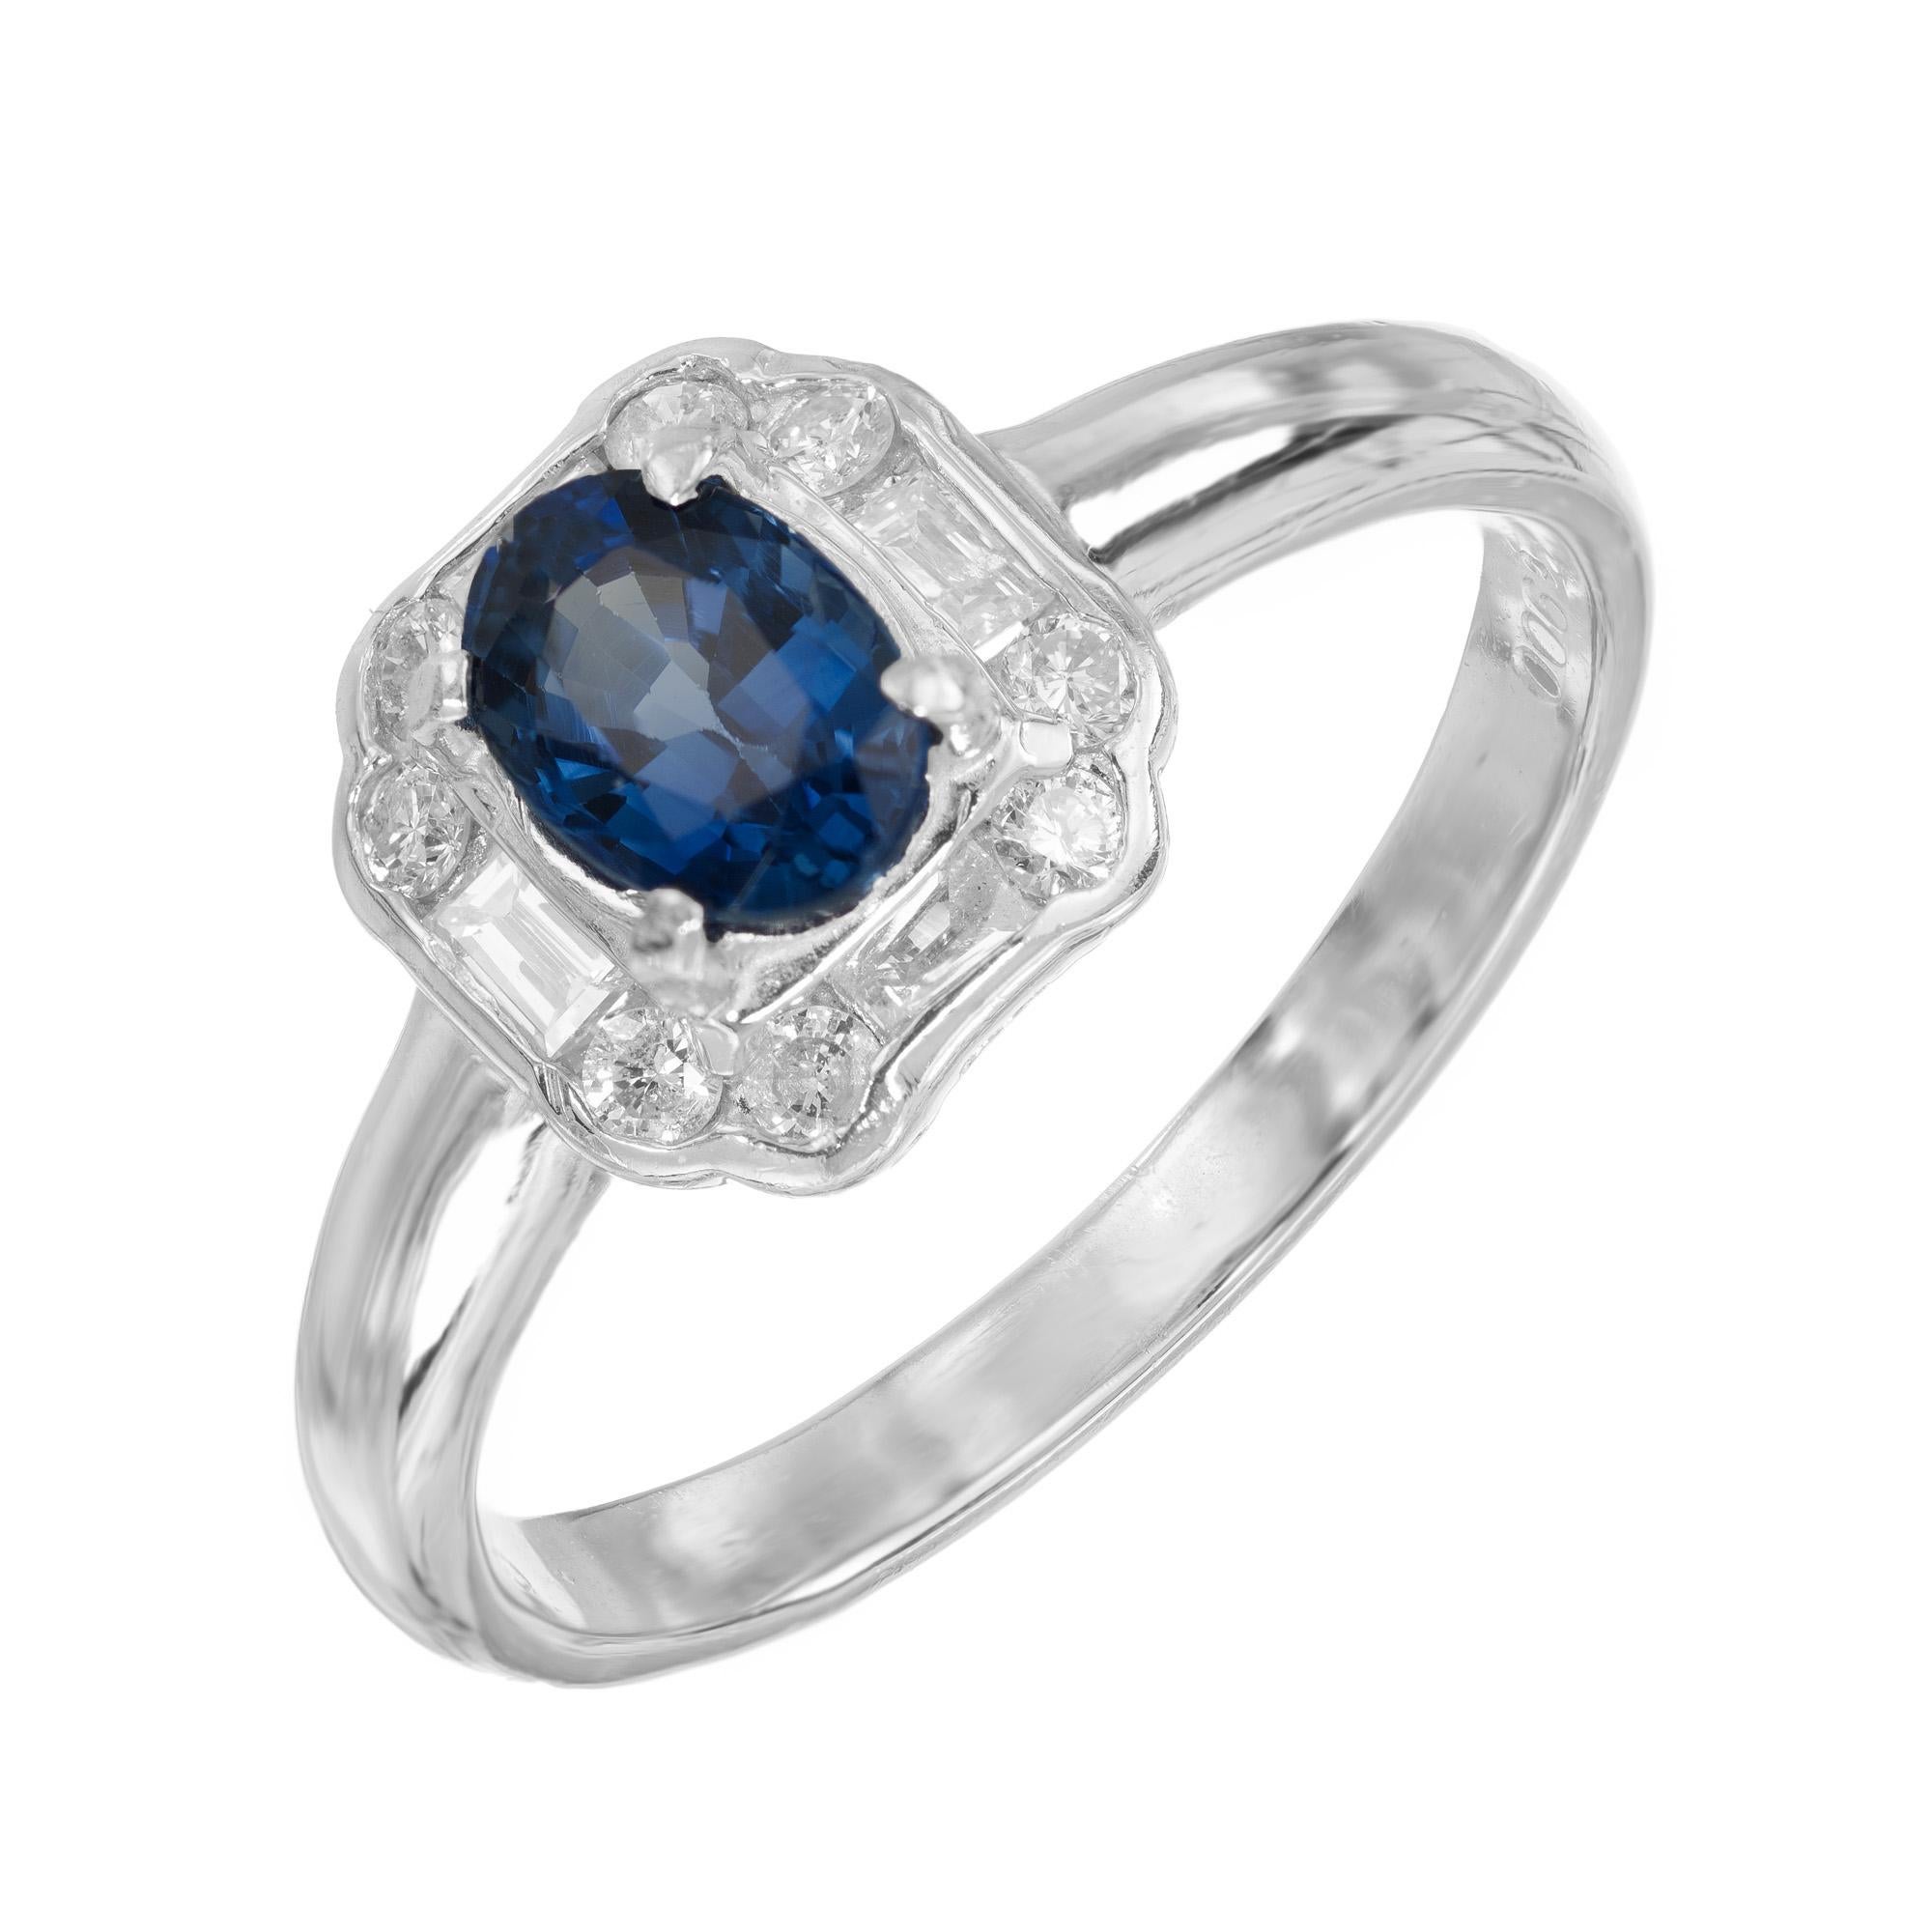 1940’s Retro Deco Style bright Ceylon  Sapphire and diamond engagement ring.  .80ct oval sapphire center stone, mounted in a platinum setting accented by 8 round cut diamonds. The striking contrast between the deep blue hue of the sapphire and the